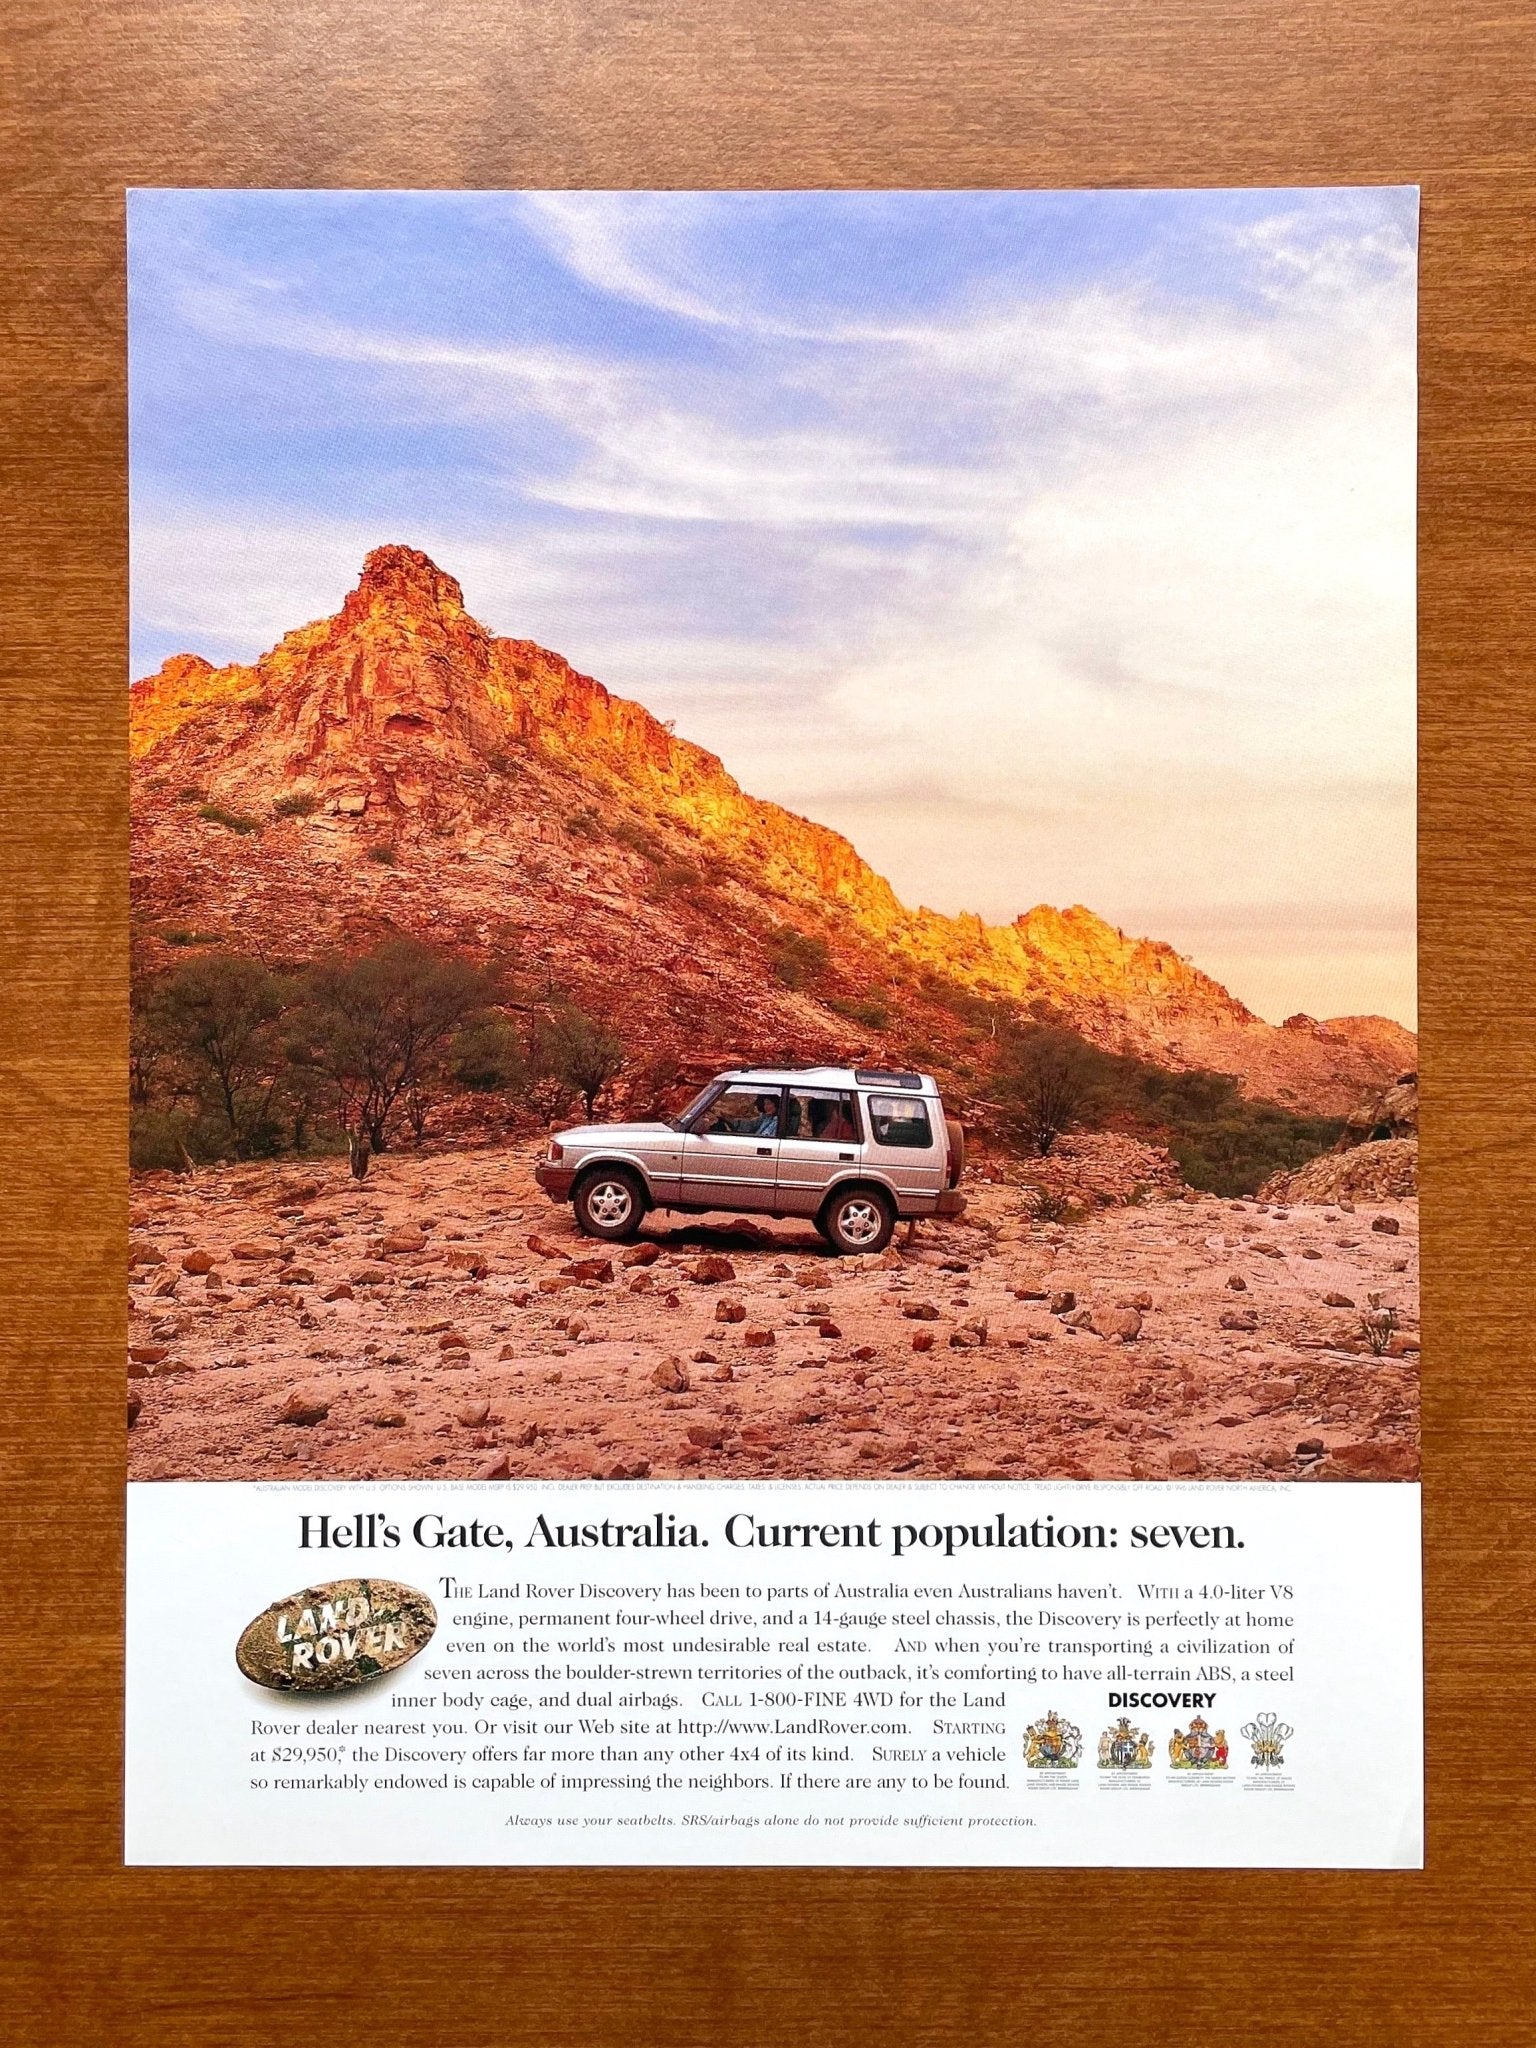 Discovery "Hell’s Gate, Australia..." Ad Proof